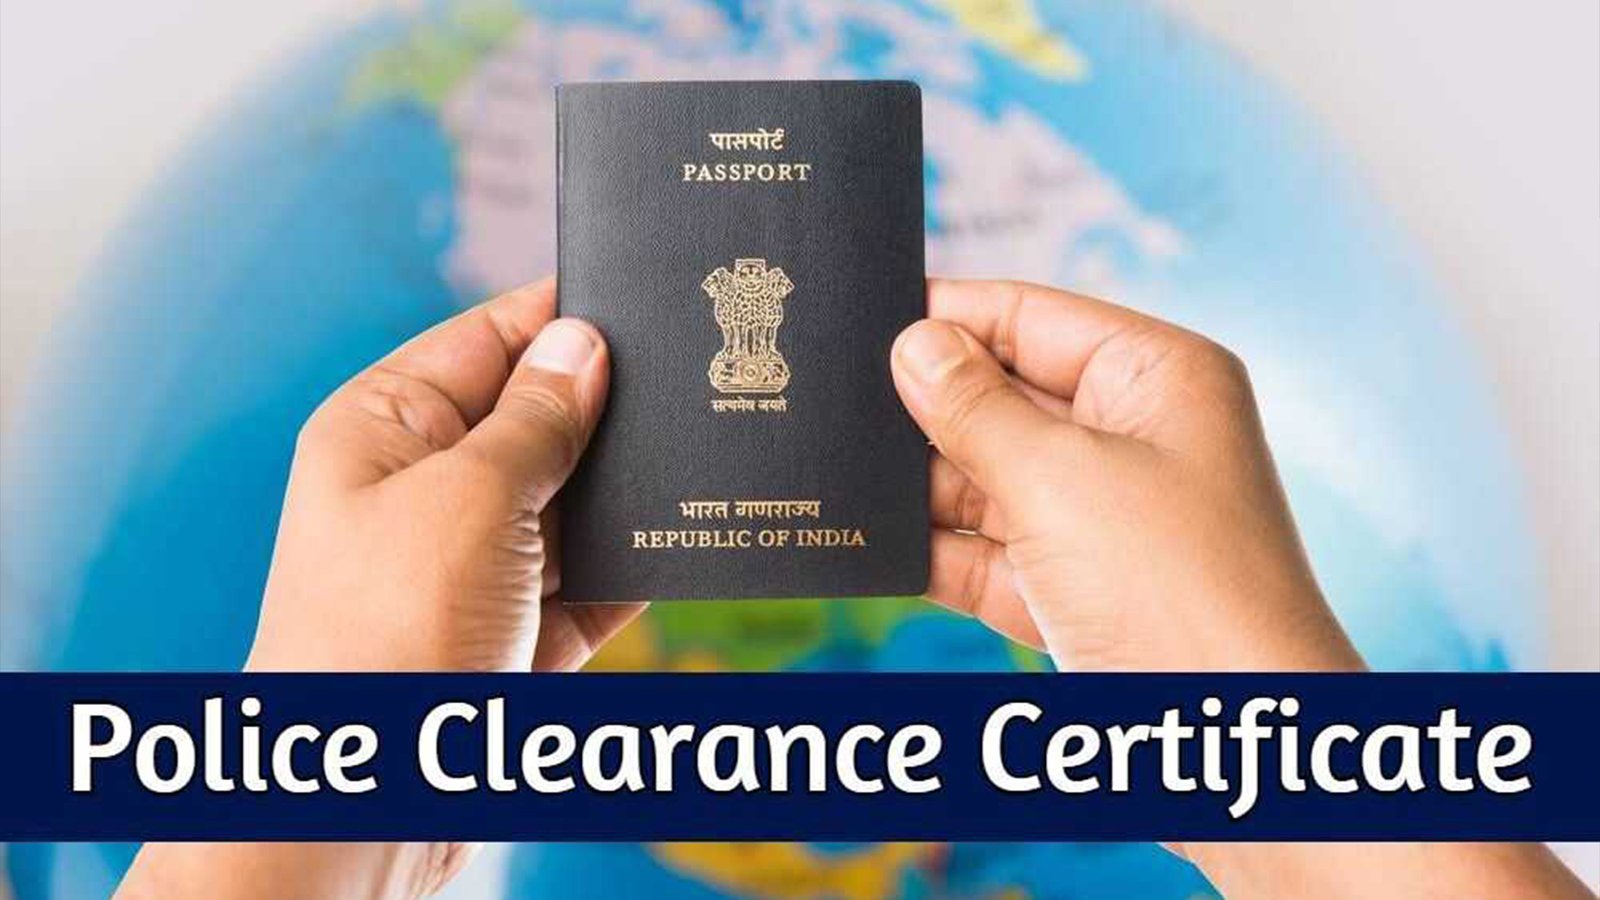 POLICE CLEARANCE CERTIFICATE